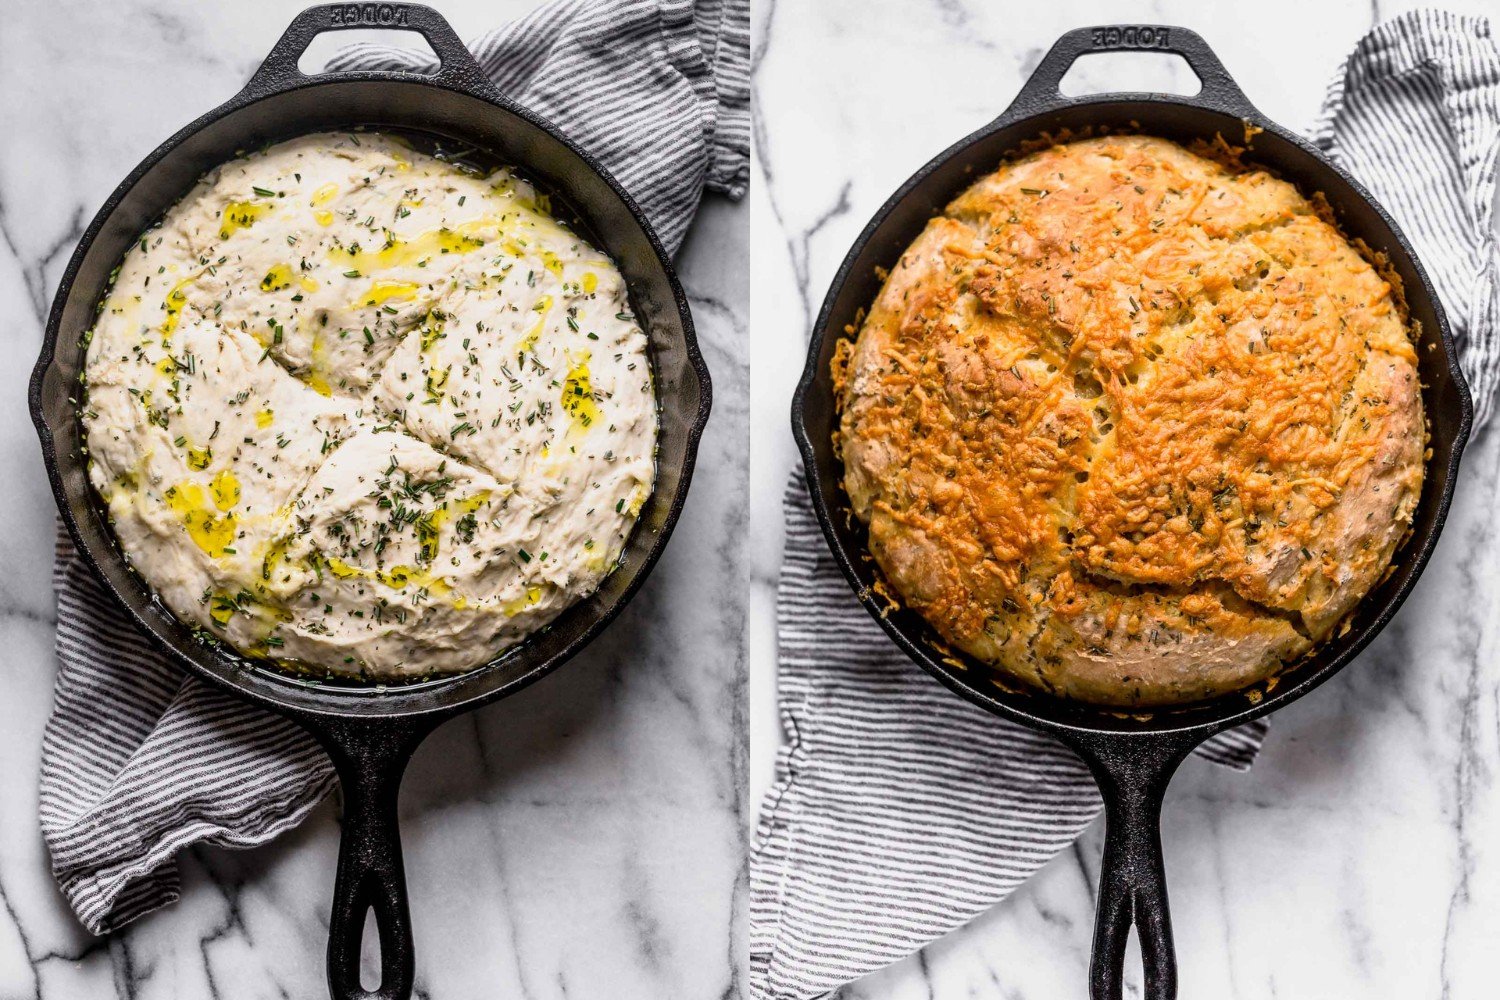 side-by-side images of the No Knead Rosemary Parmesan Skillet Bread before and after baking.